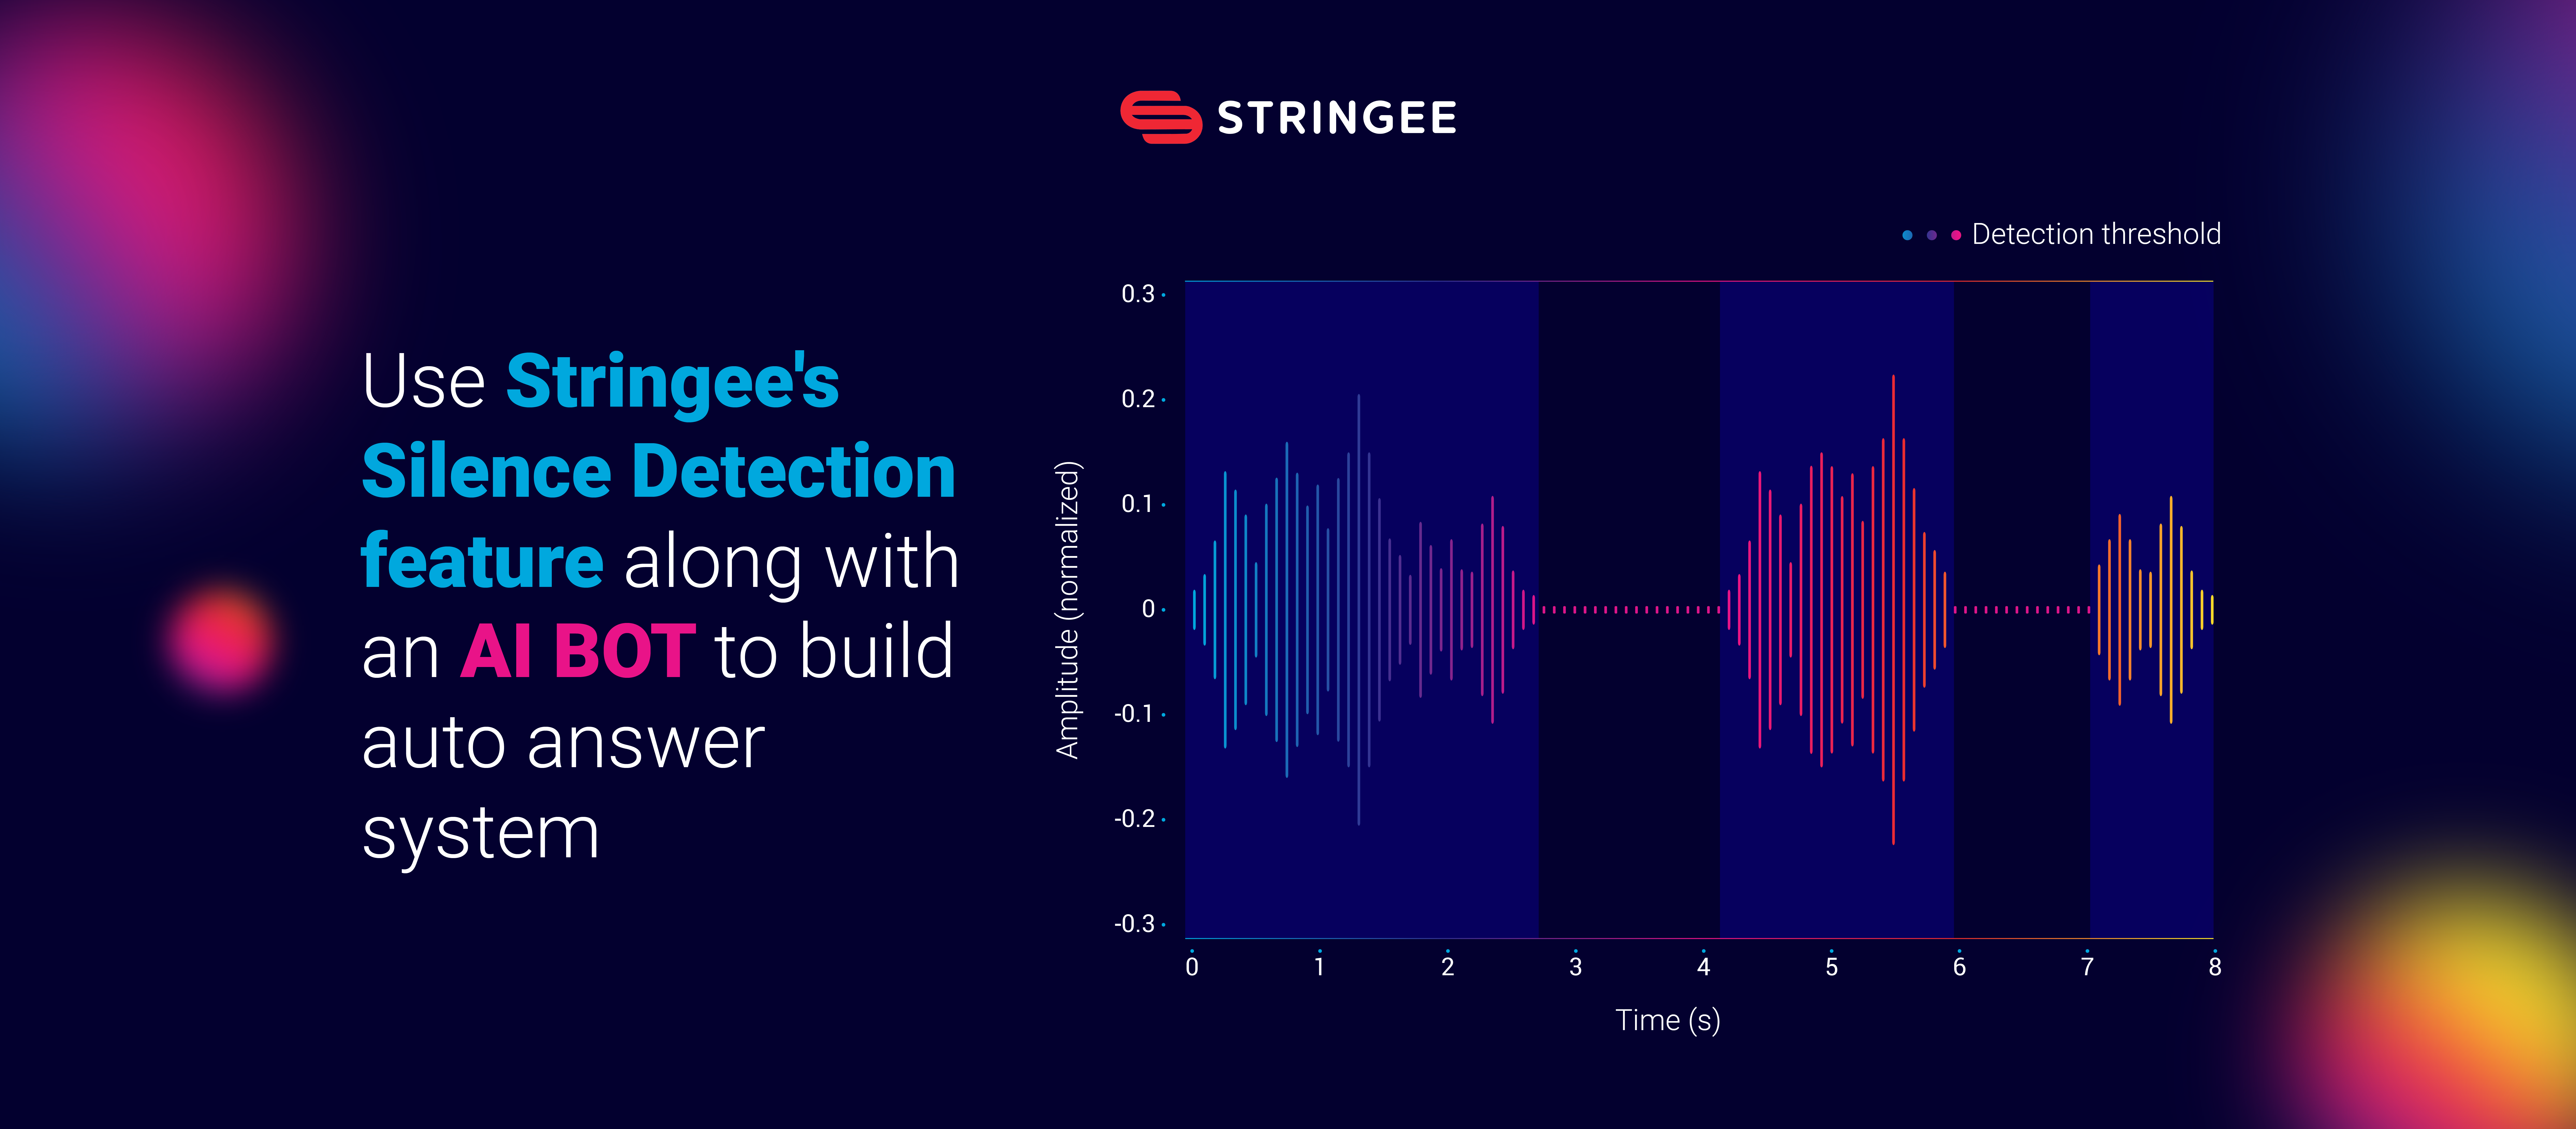 Use Stringee's Silence Detection feature along with an AI BOT to build auto answer system